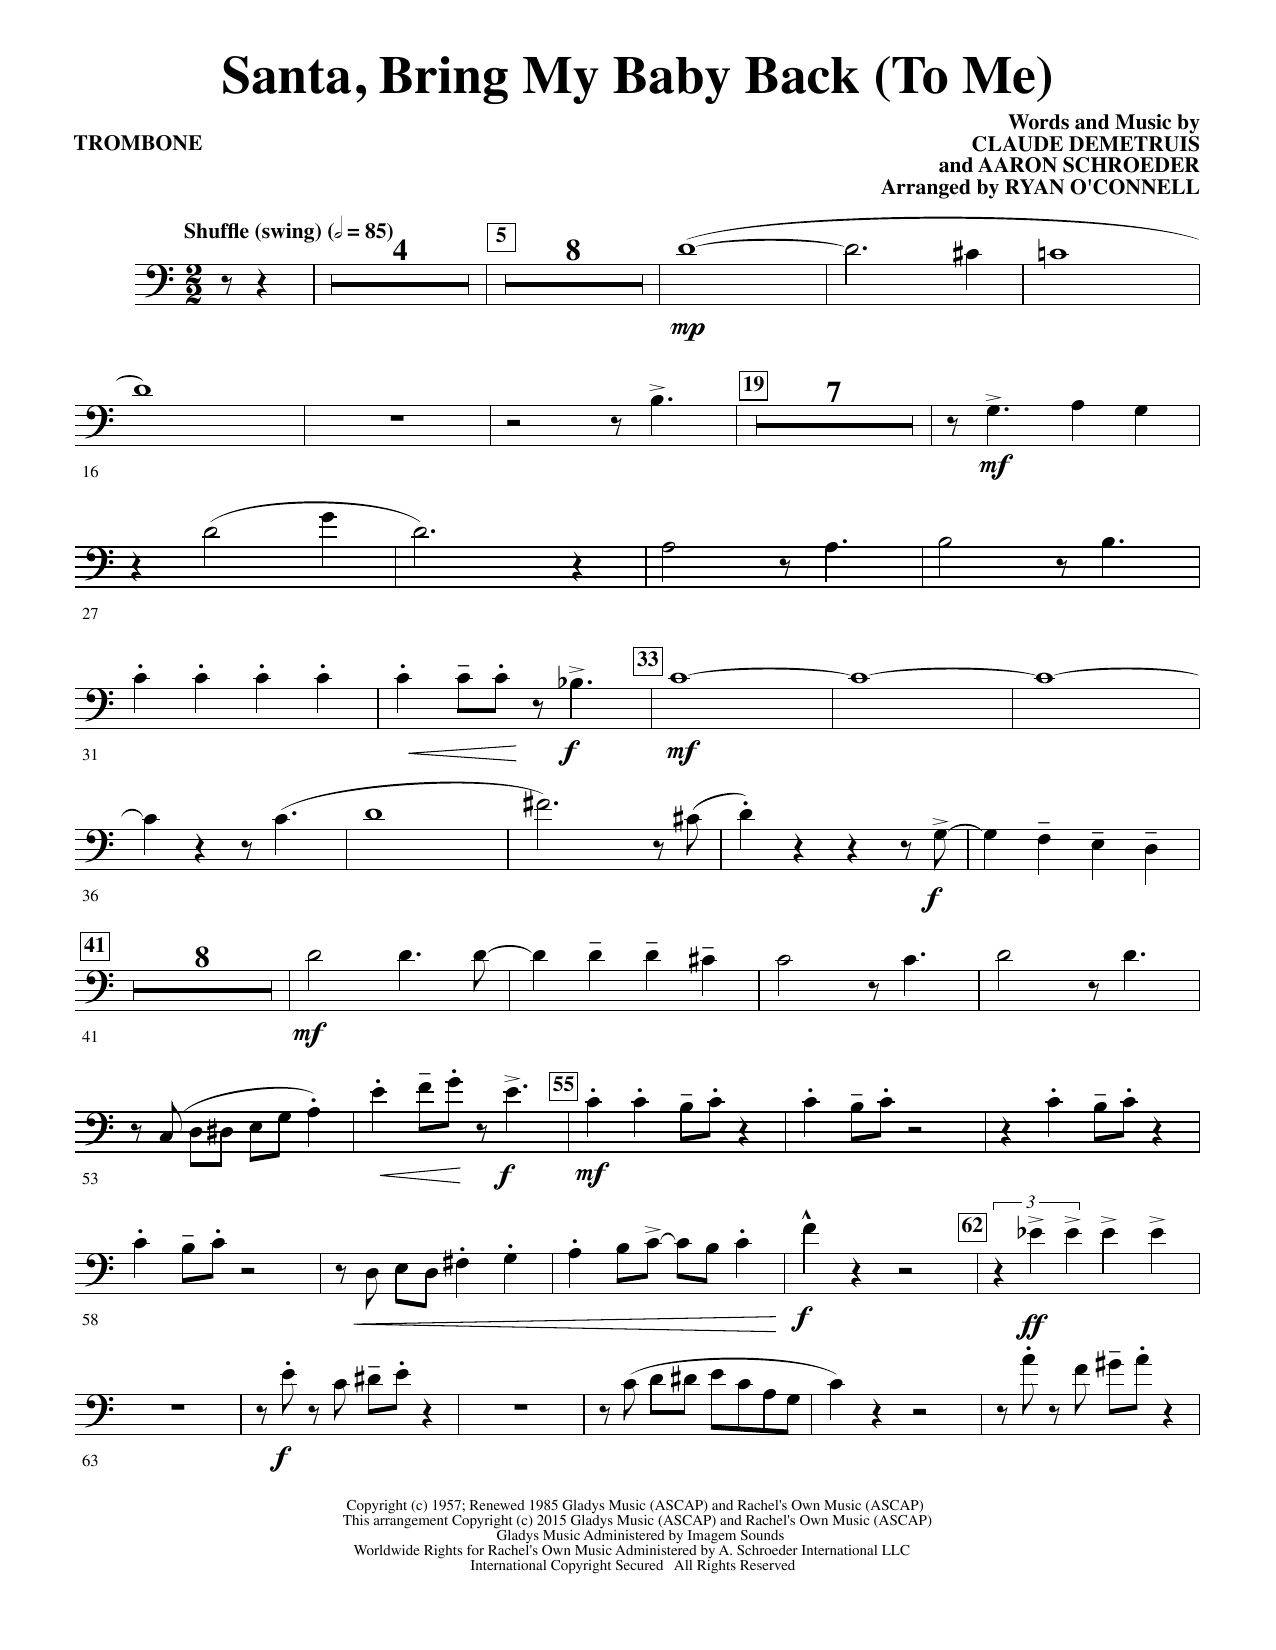 Ryan O'Connell Santa, Bring My Baby Back (To Me) - Trombone sheet music notes and chords. Download Printable PDF.